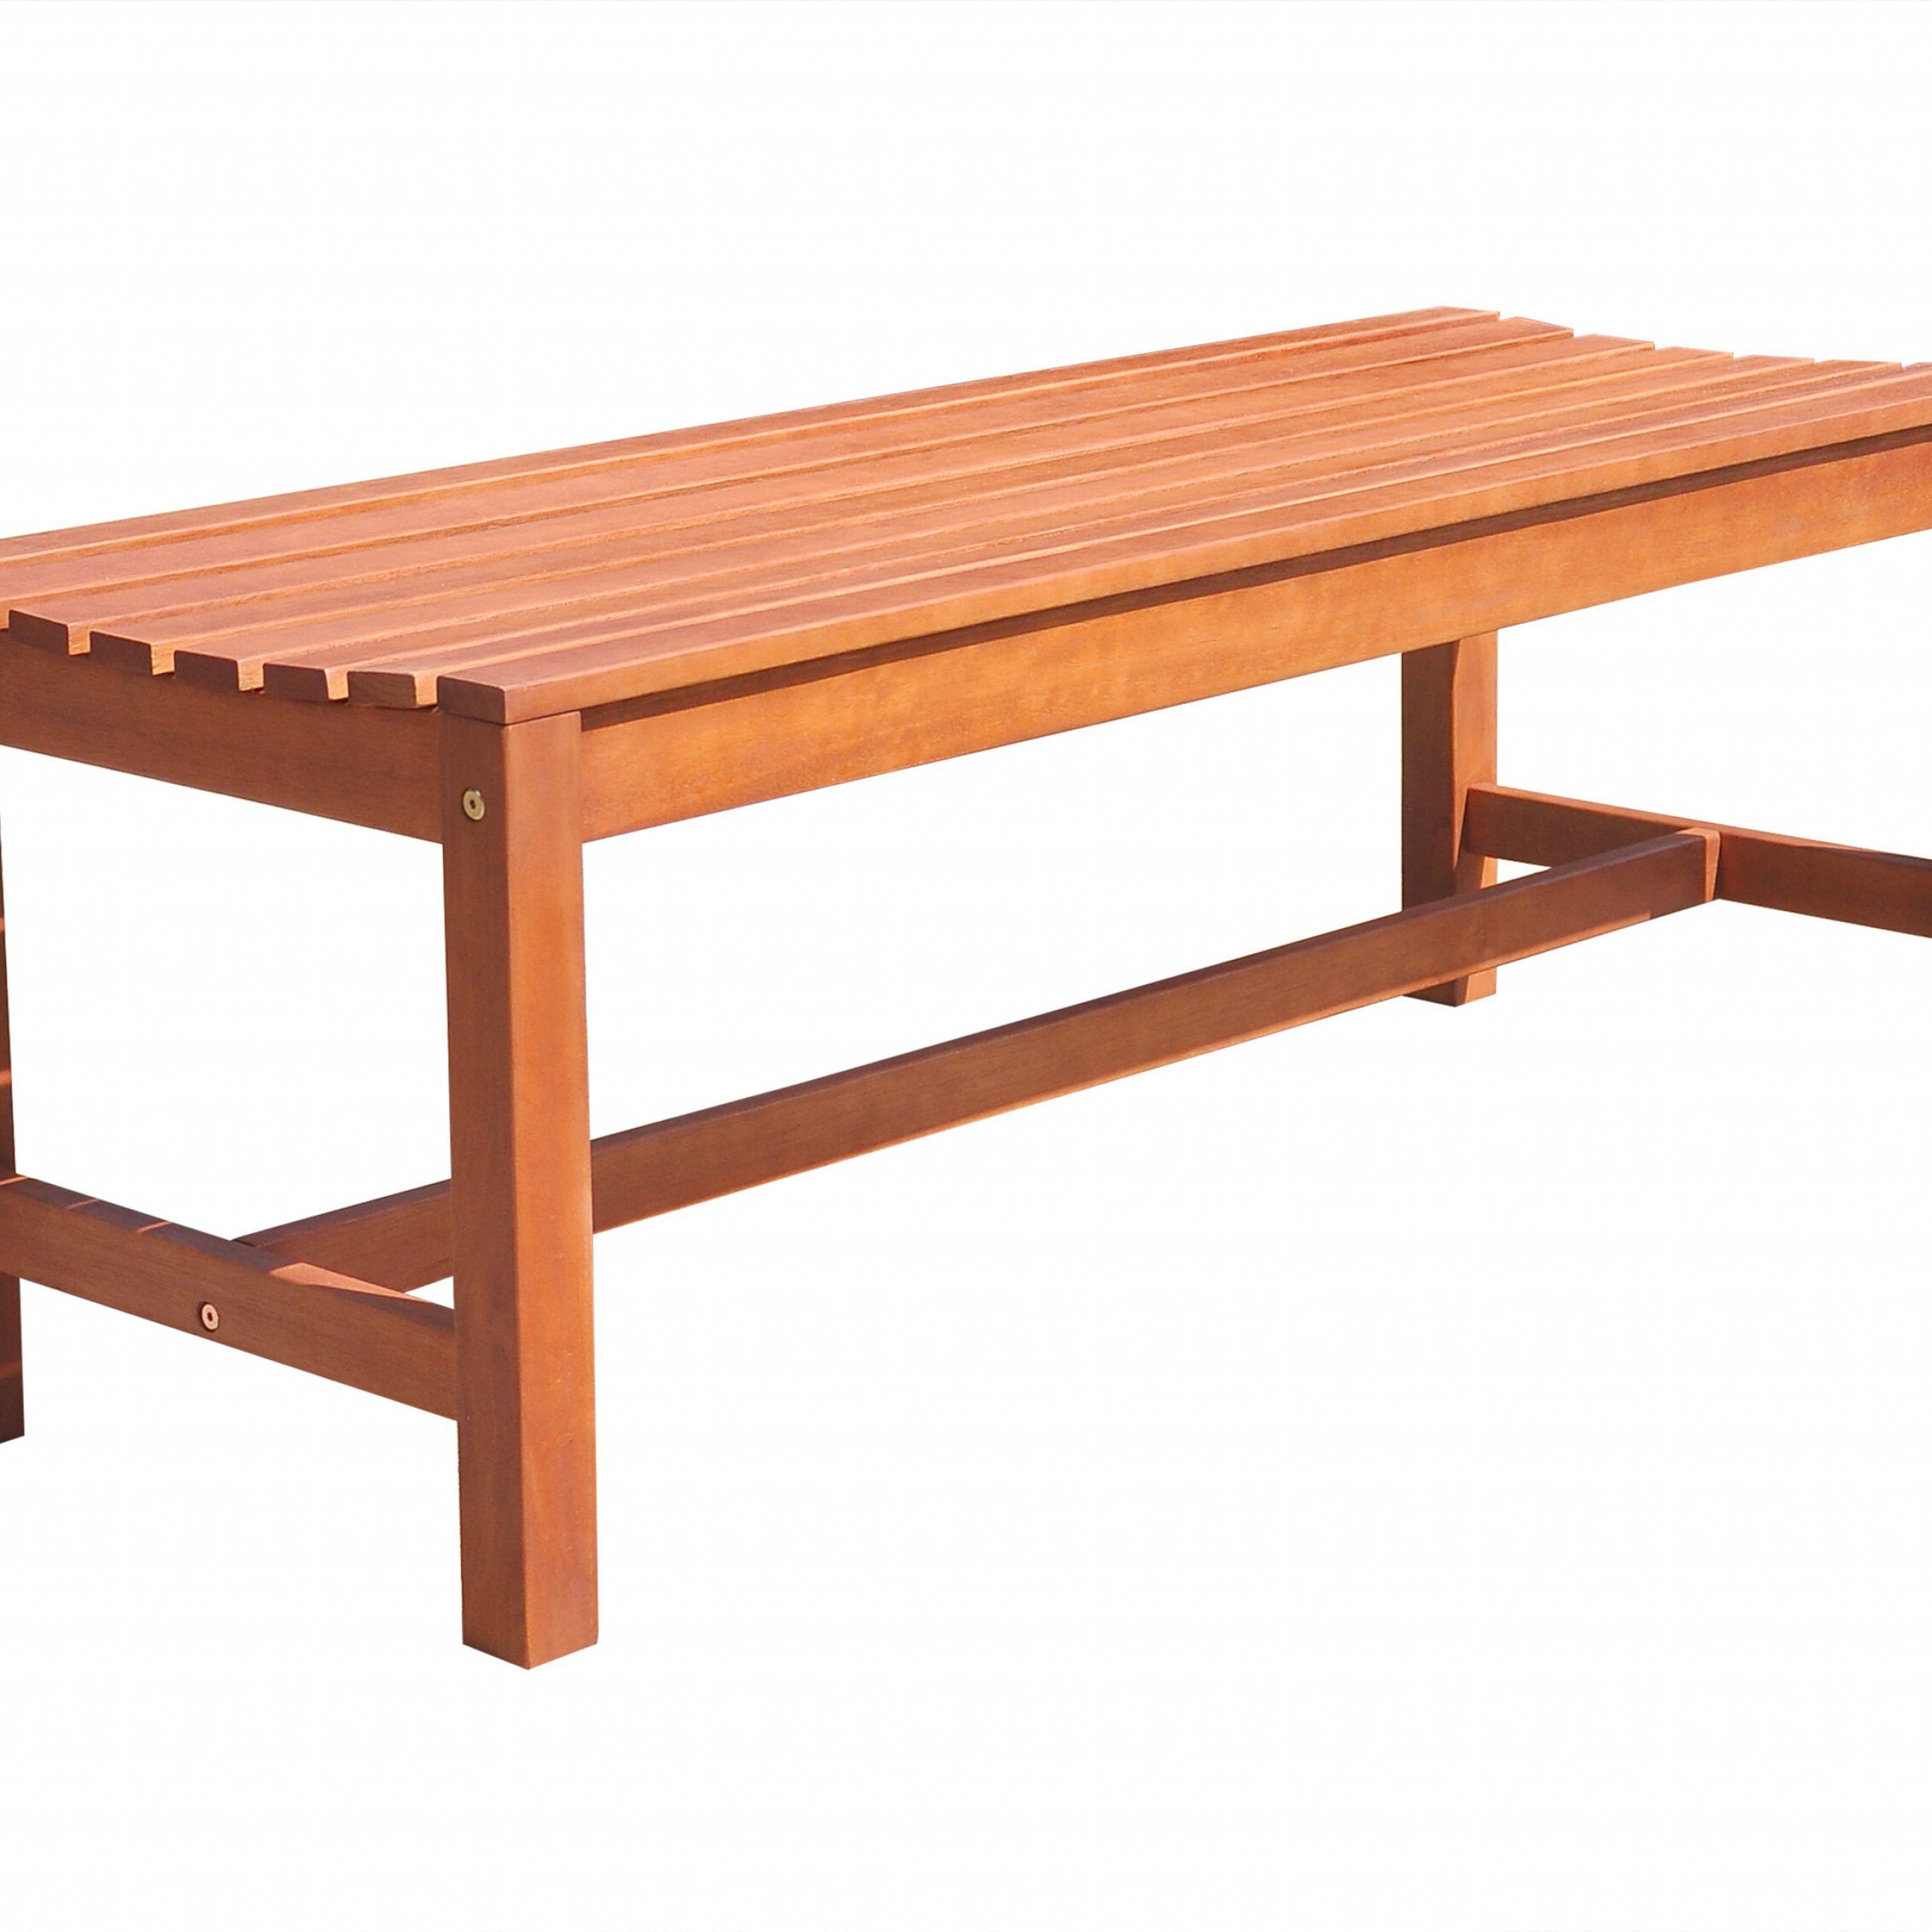 Amabel Wooden Outdoor Picnic Bench Regarding Preferred Amabel Wooden Garden Benches (View 8 of 30)